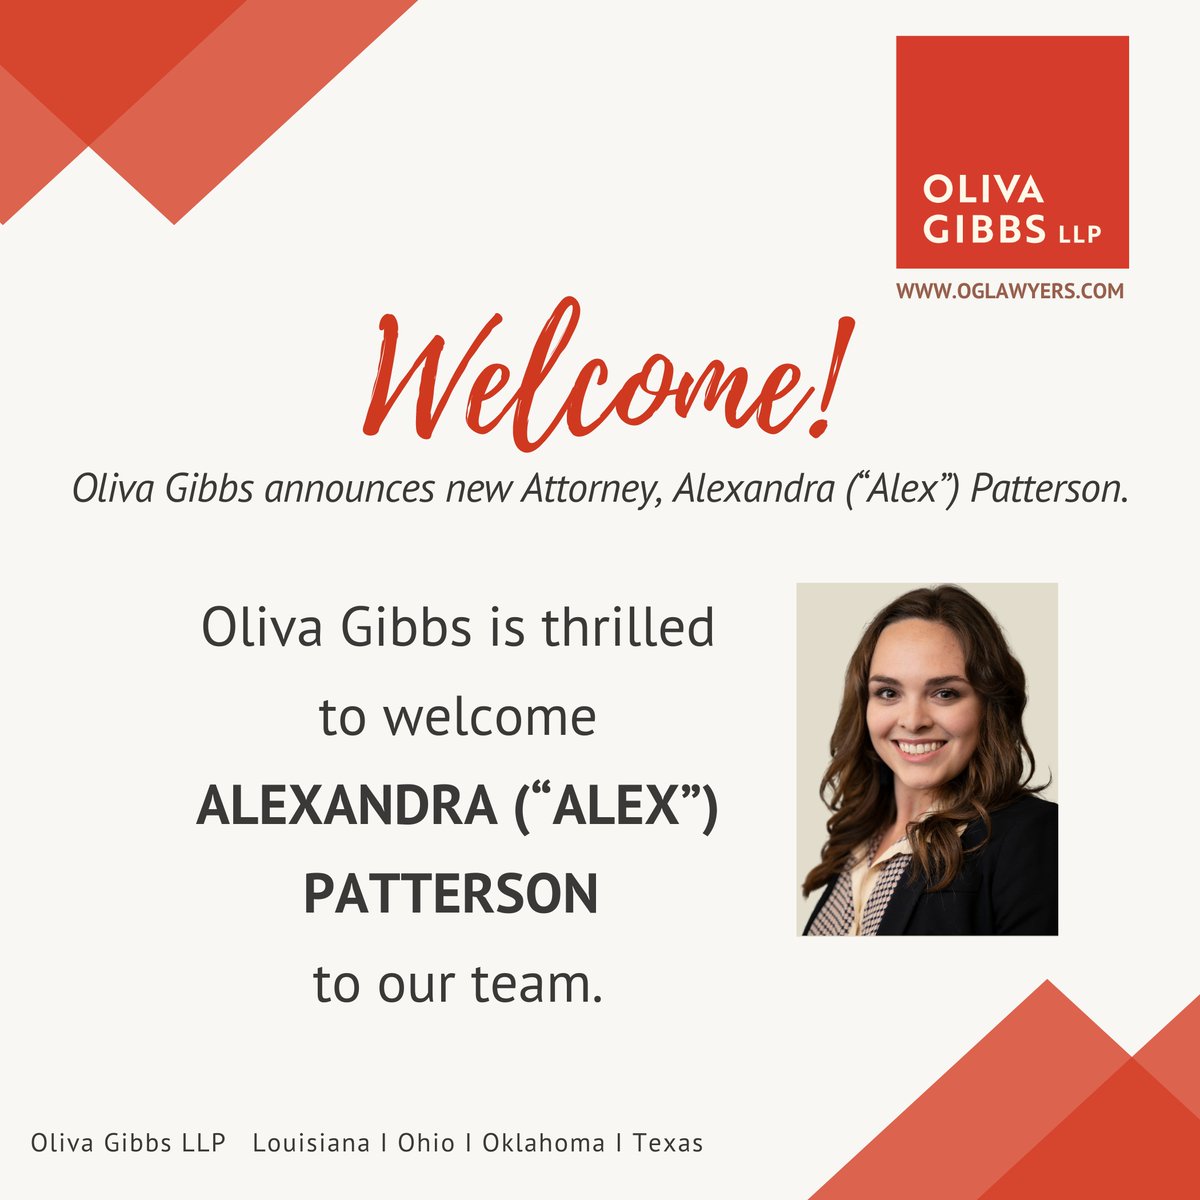 @OlivaGibbsLLP welcomes Alexandra 'Alex' Patterson as a new attorney at the firm. Her focus on upstream oil and gas and minerals & royalties will be a valuable asset to our team. Learn more about Alex here: bit.ly/3WtP8OM. #EnergyLaw #OilAndGasLaw #WomenInEnergy